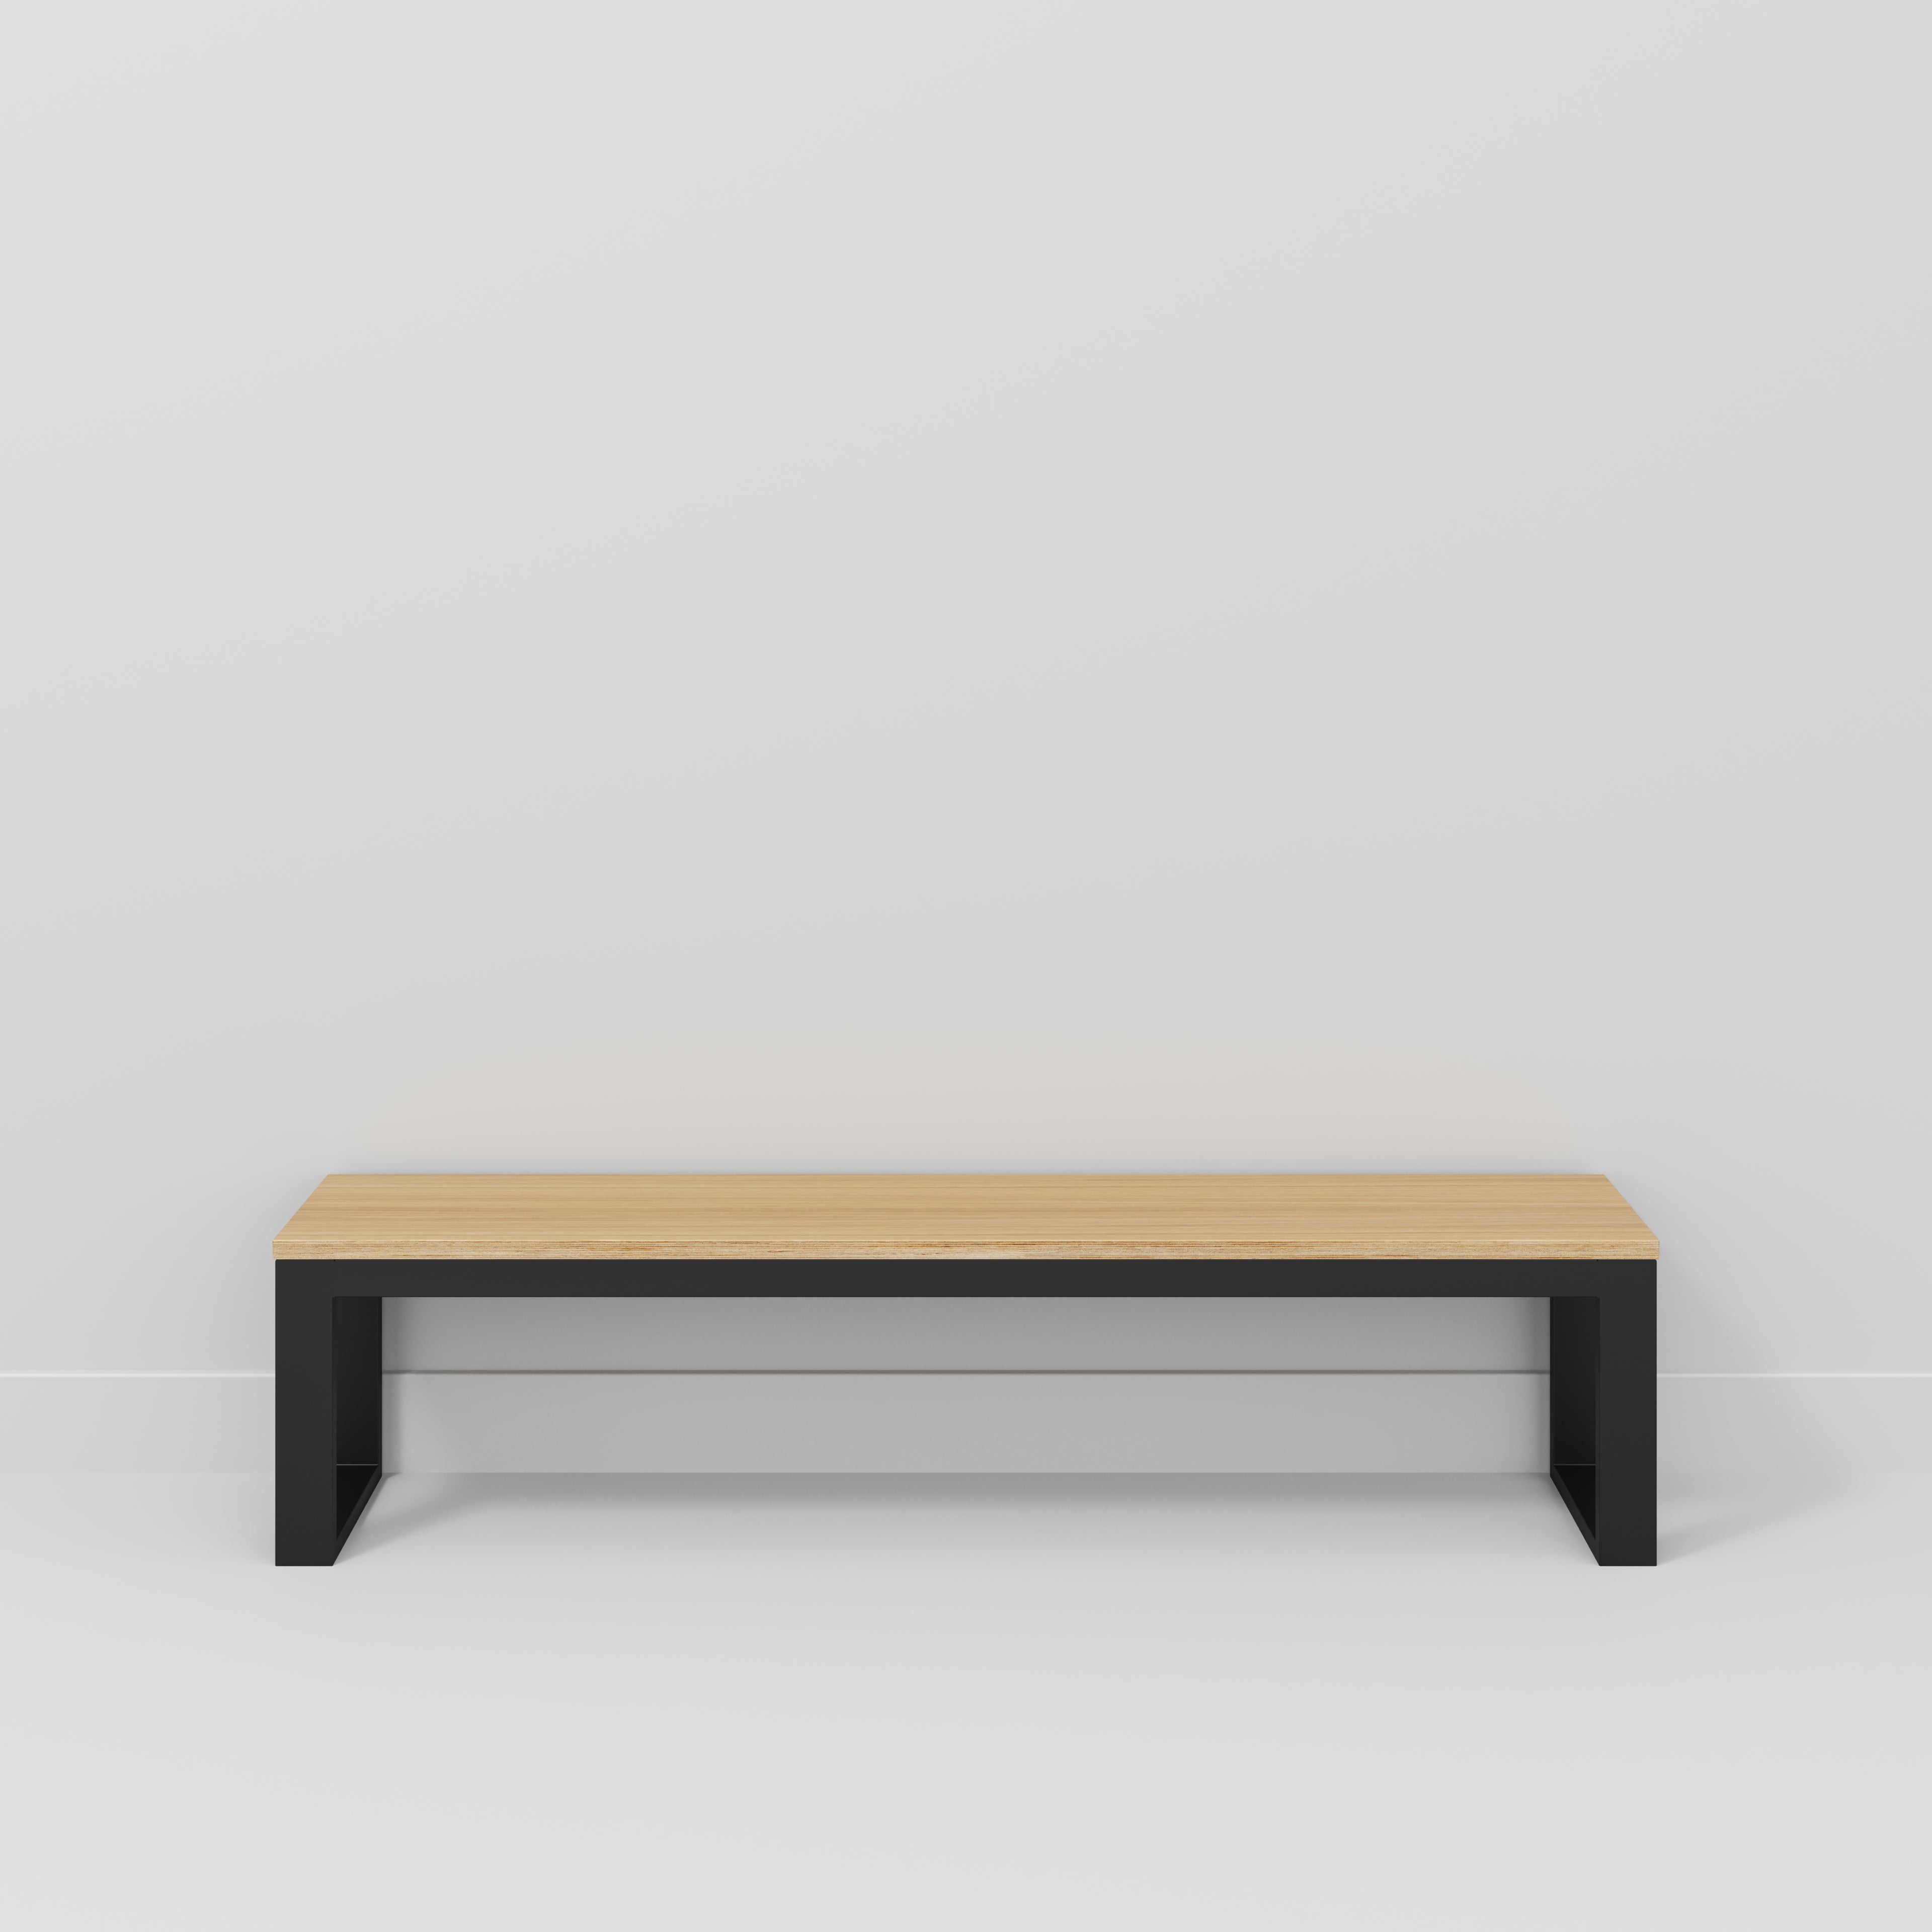 Bench Seat with Black Industrial Frame - Plywood Oak - 1800(w) x 325(d)